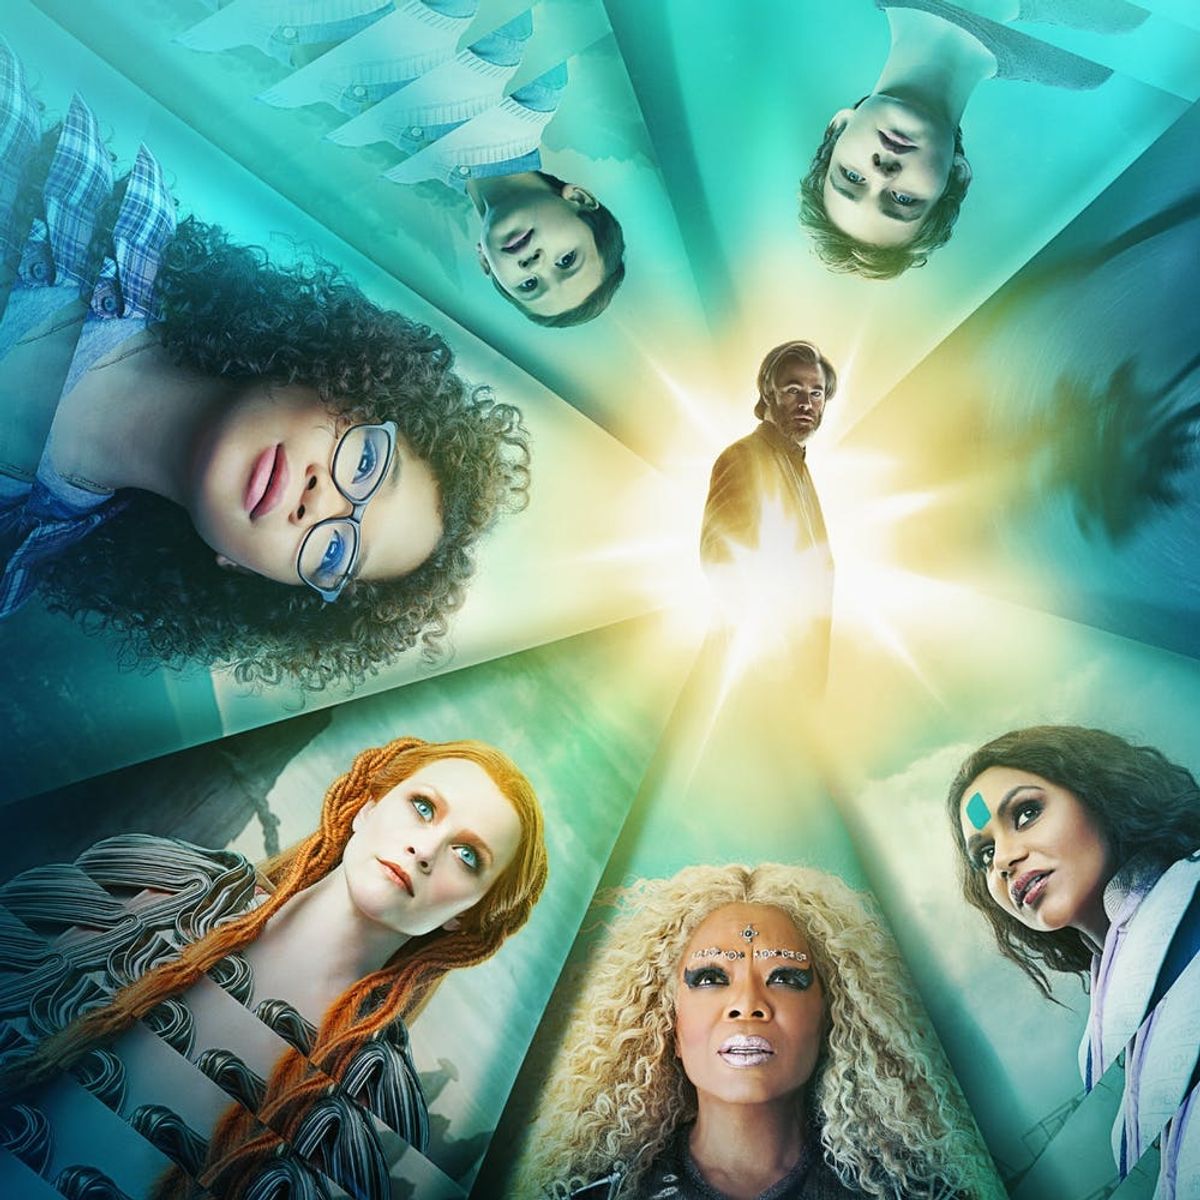 The New “A Wrinkle in Time” Trailer Will Give You Chills